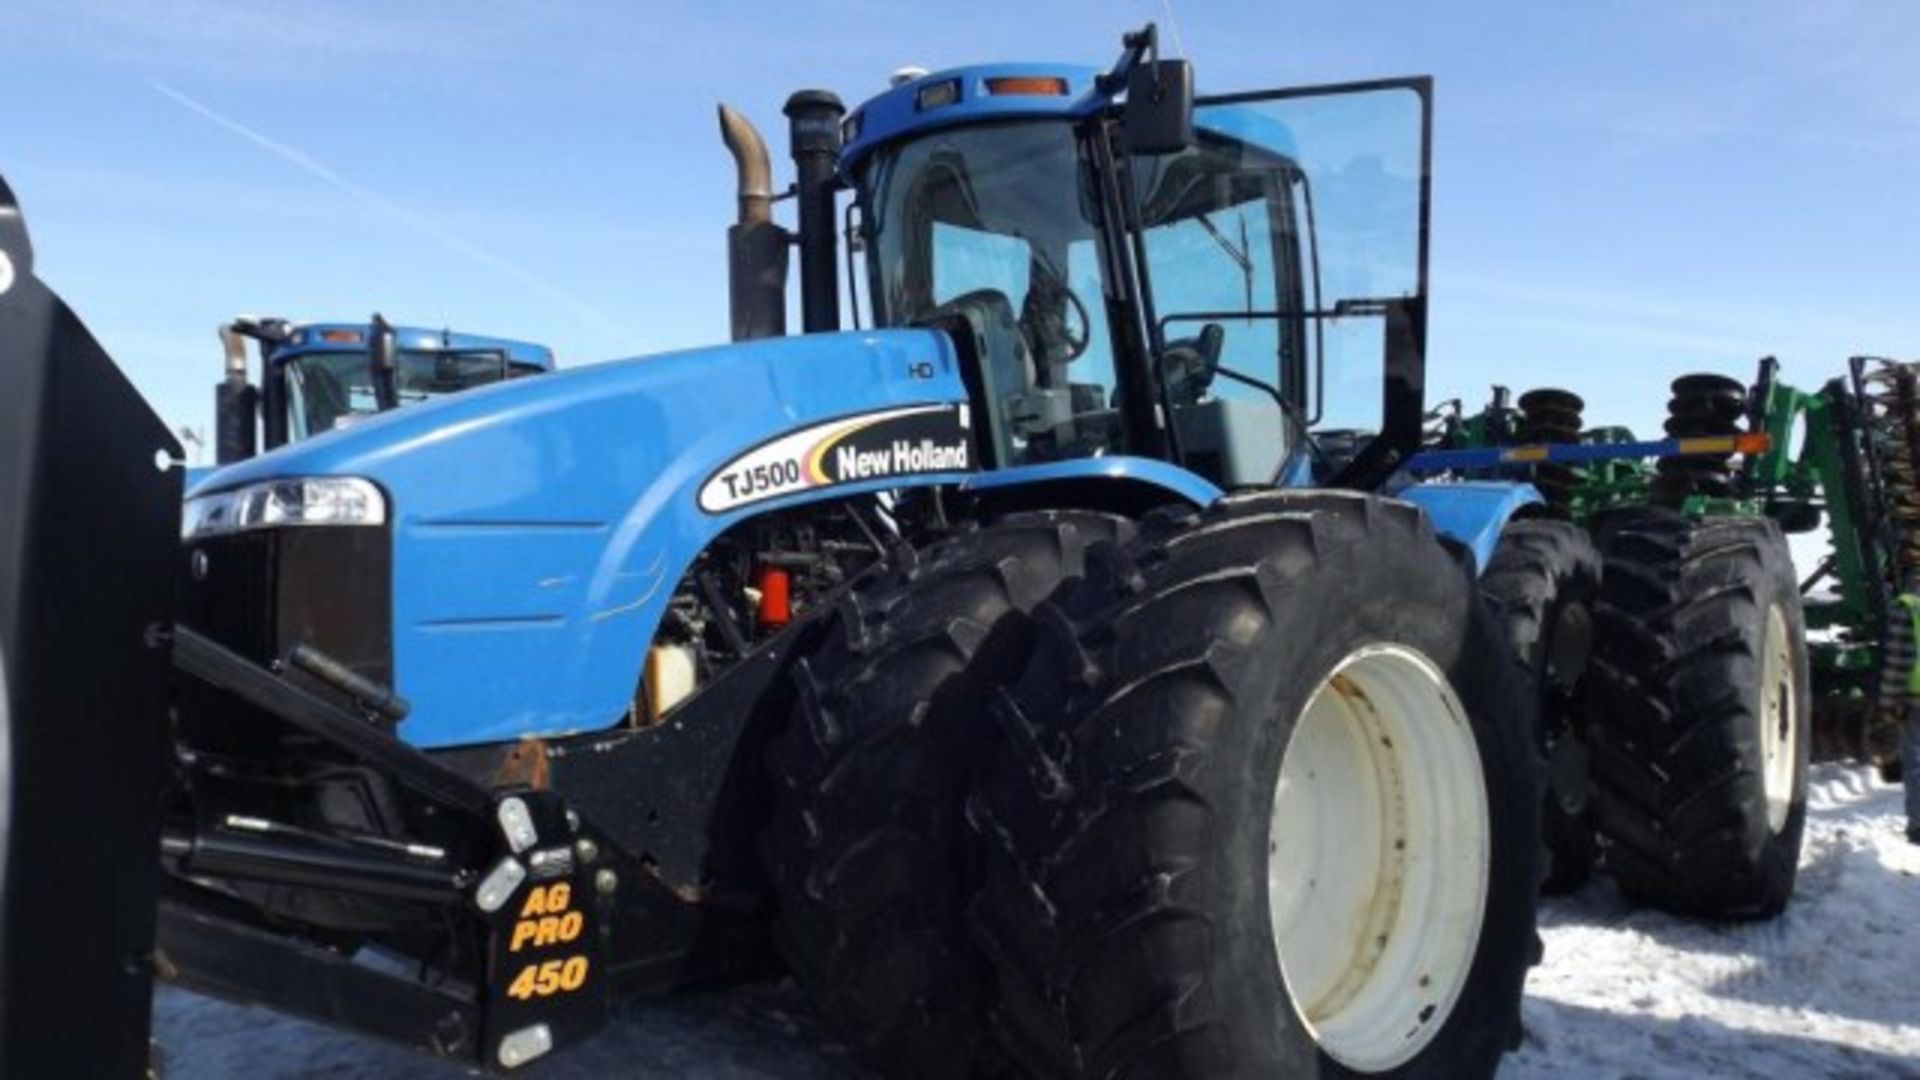 New Holland TJ500 HD Tractor '05, sn#RVS005055 6200 Hrs, 4WD, Fully Equipped Cab, 500 HP, 16/2 PS,